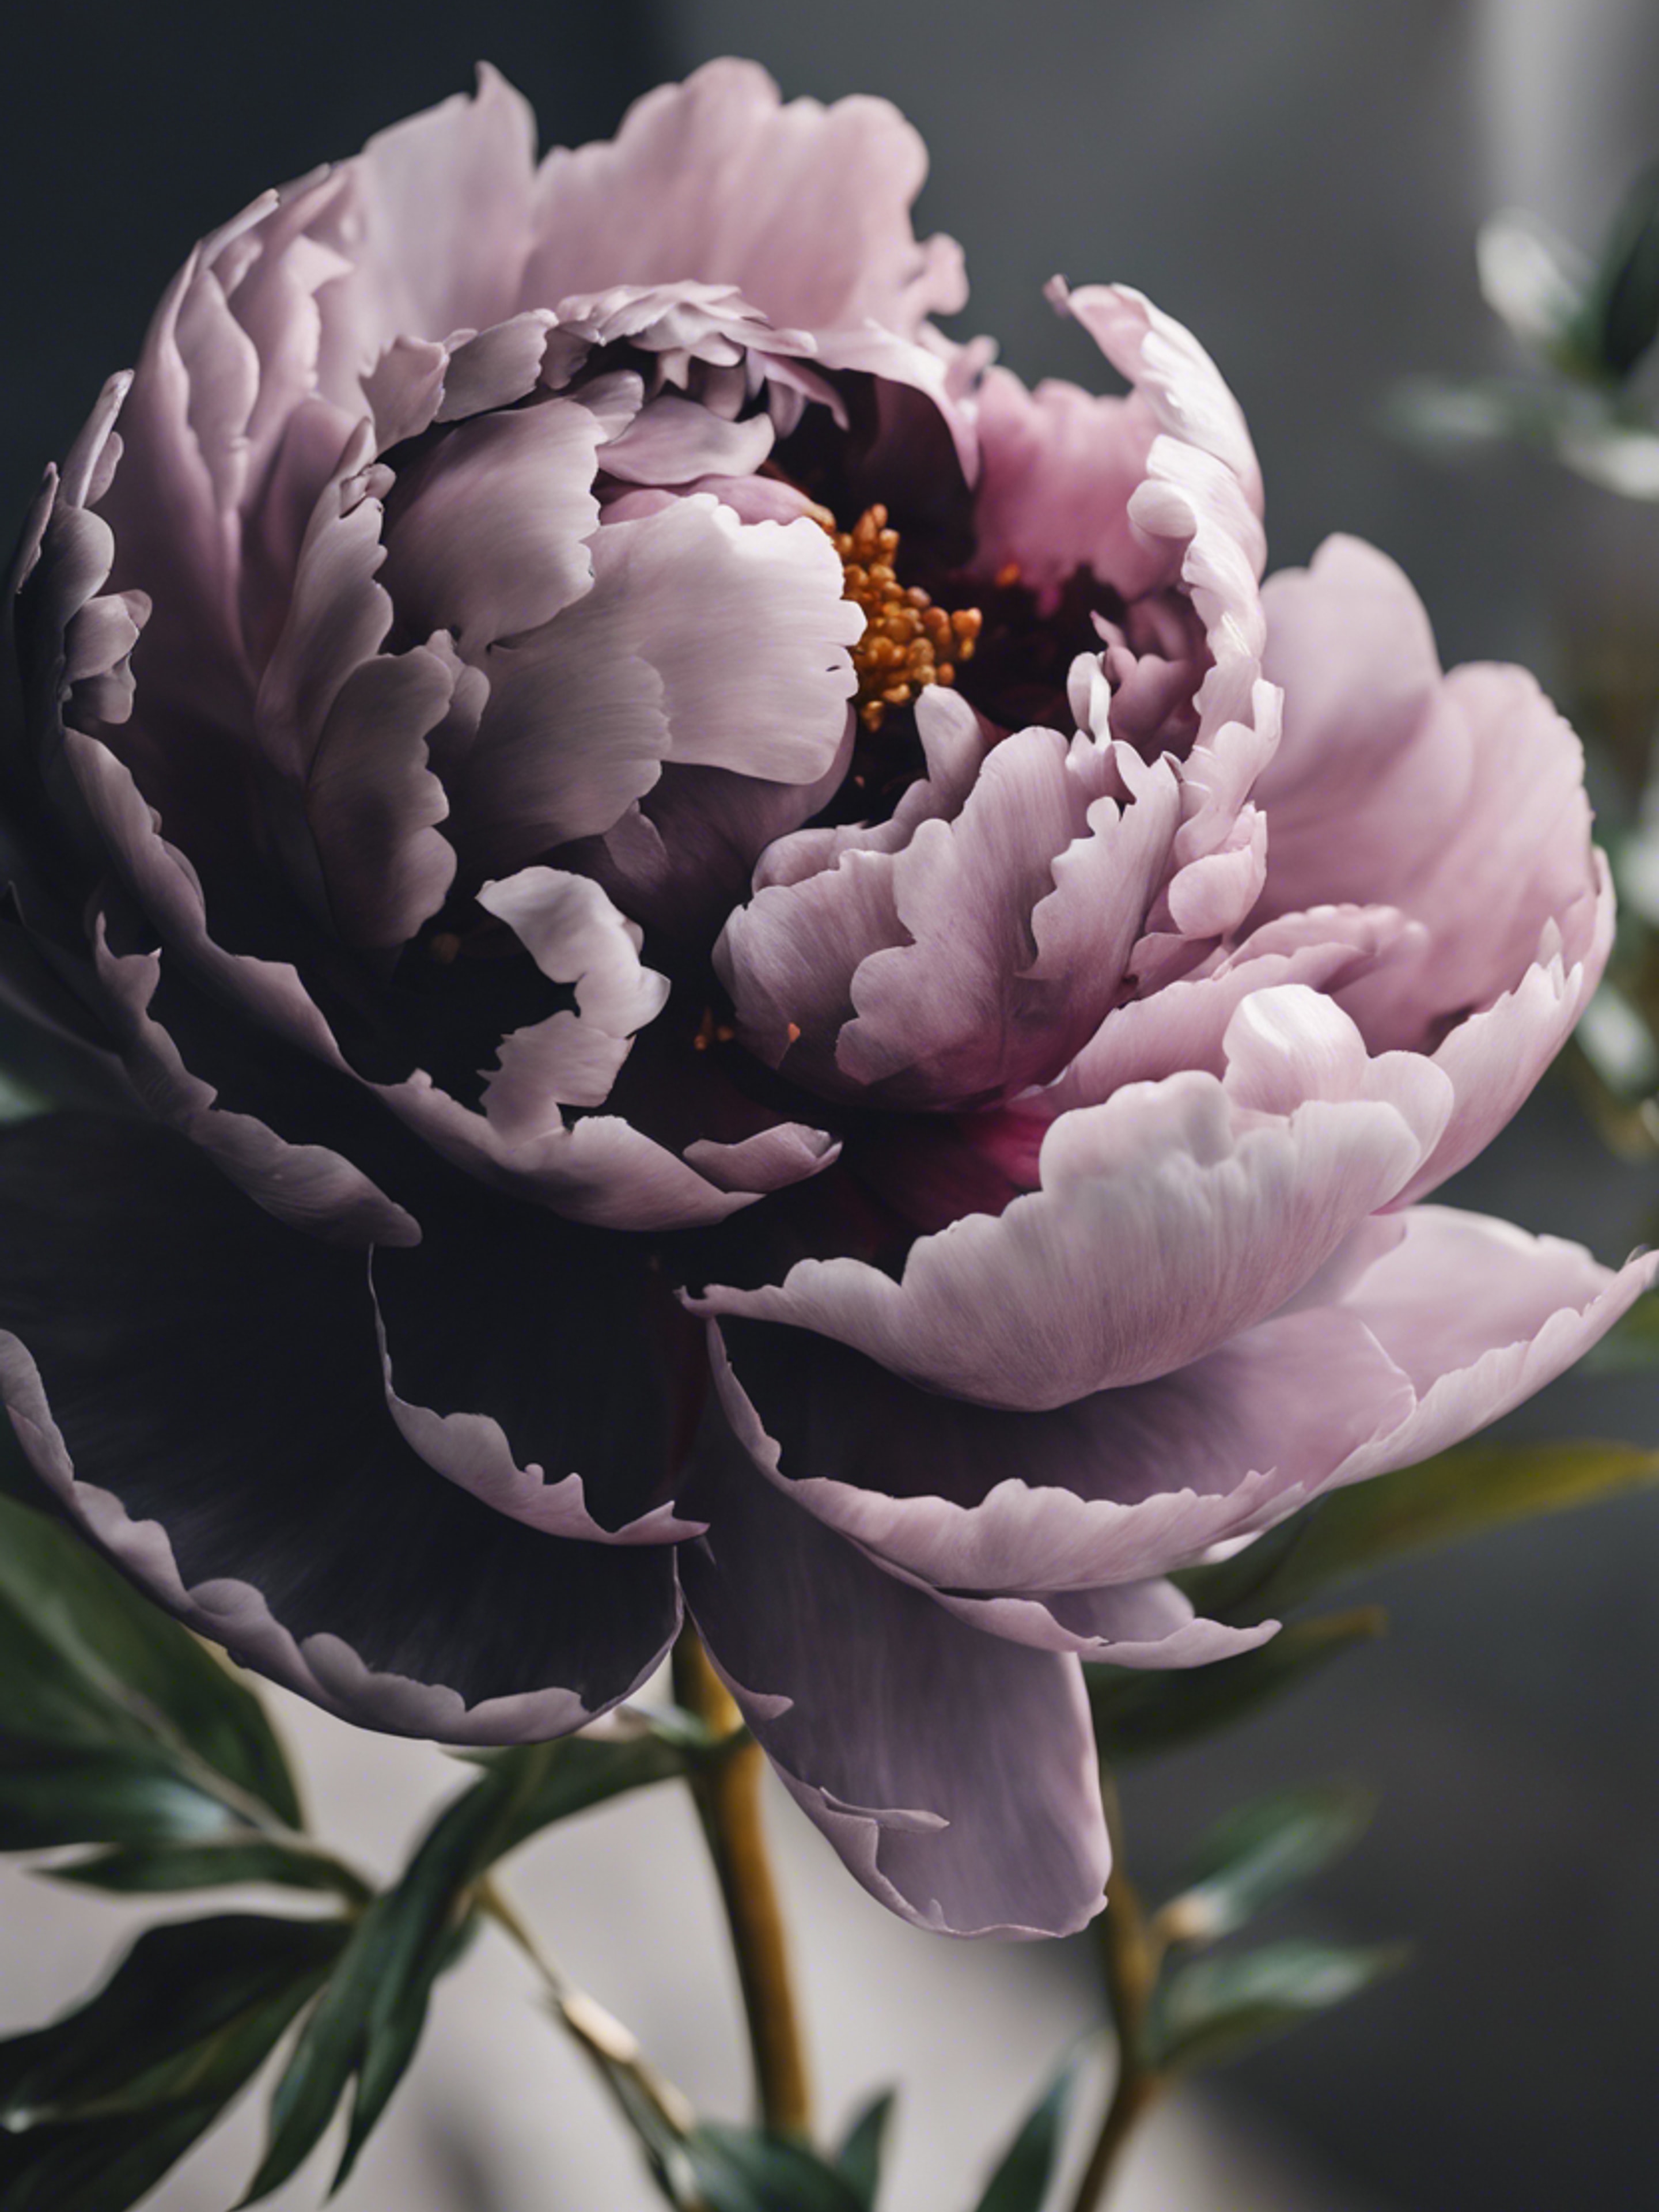 A black peony, the symbol of prosperity and honor, complementing a traditional Asian painting. 墙纸[2c78f74174874eadaf7e]